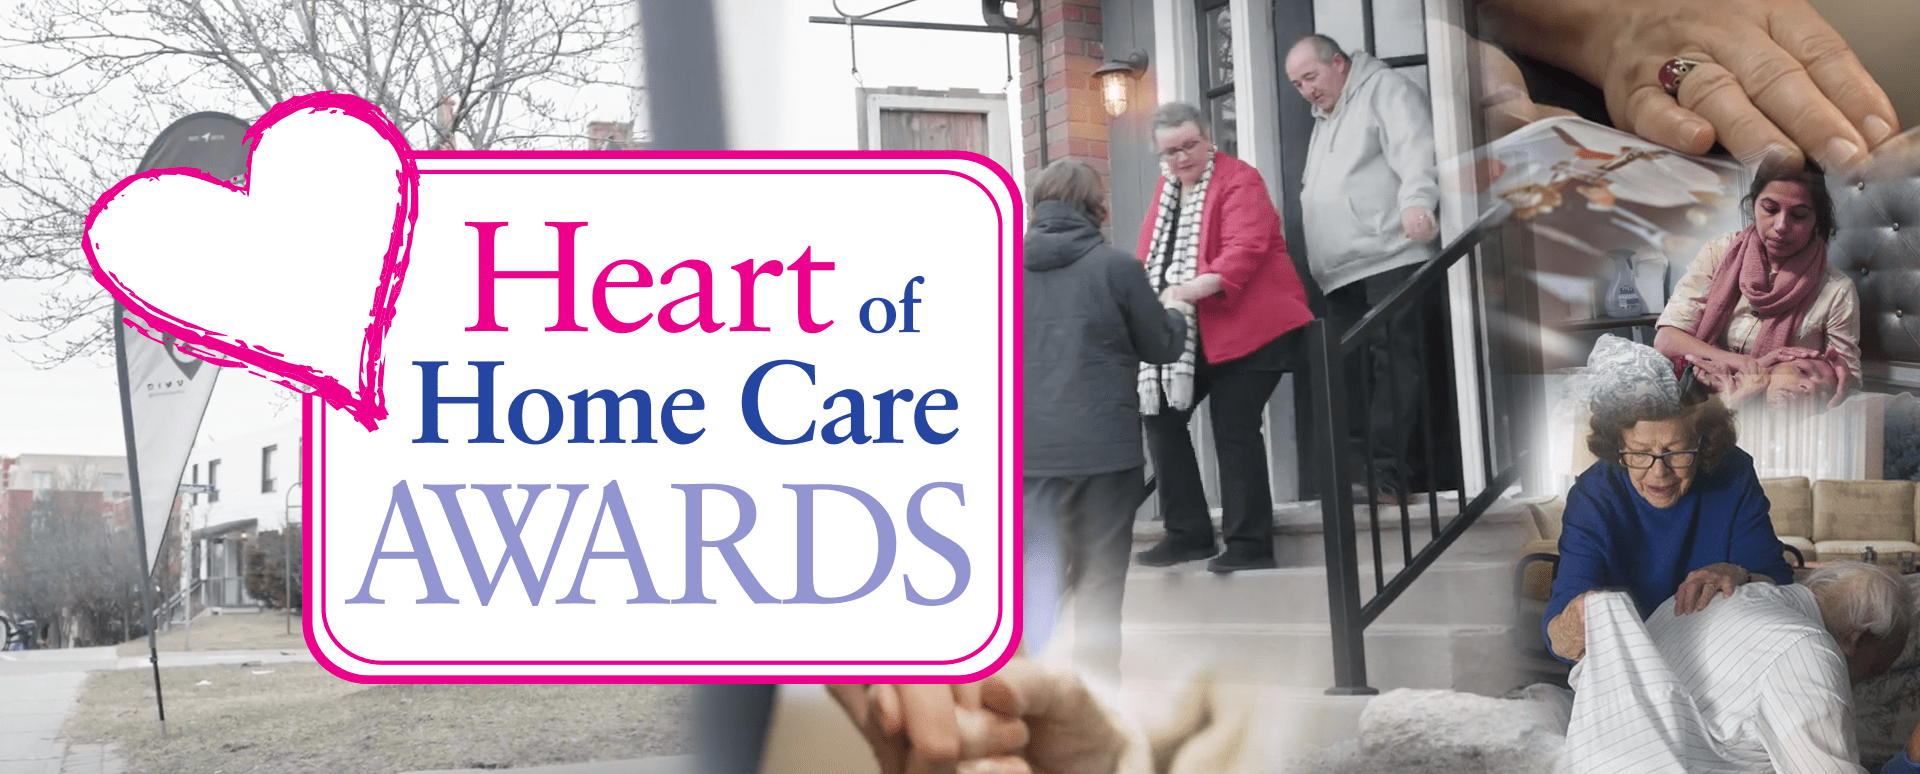 Heart of Home Care Top Banner